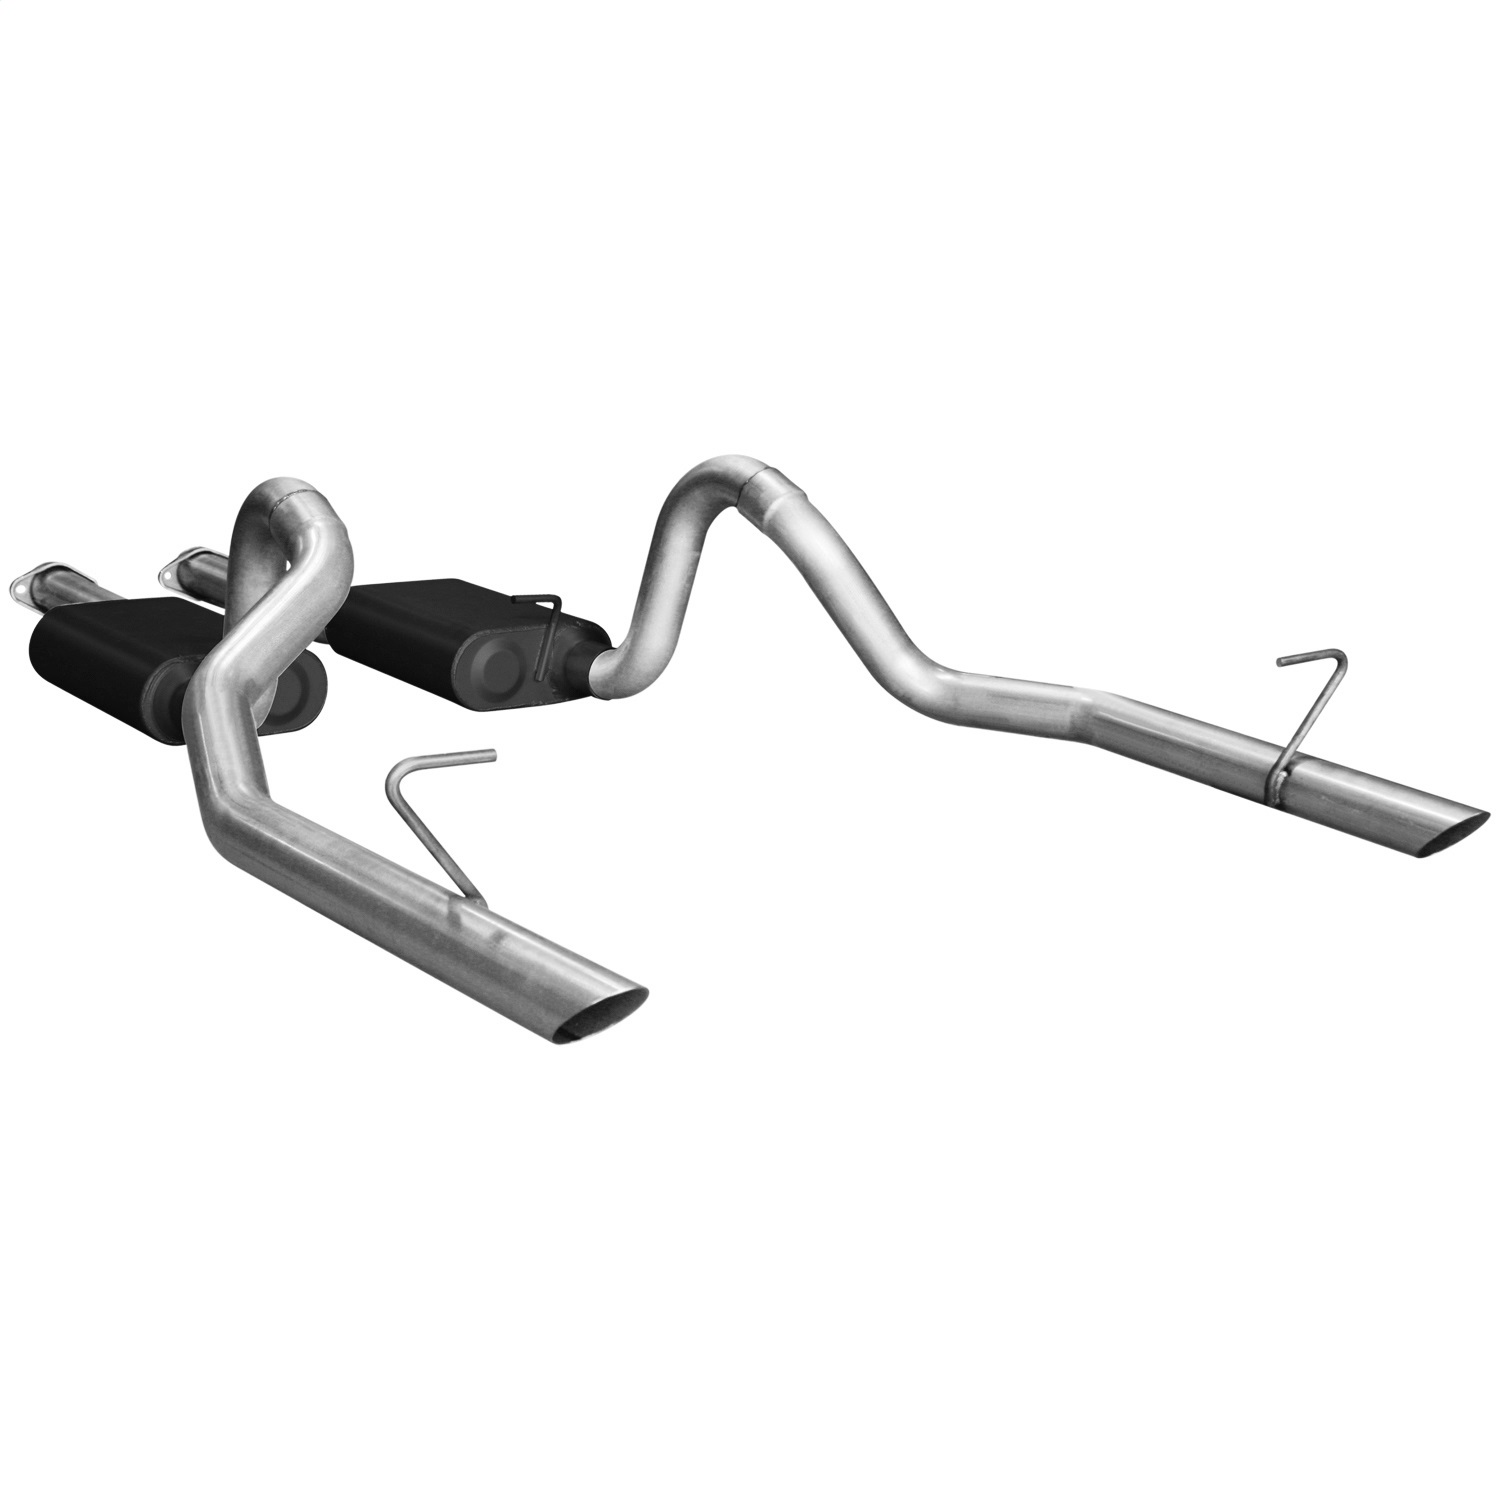 Flowmaster Flowmaster 17113 American Thunder Cat Back Exhaust System Fits 86-93 Mustang